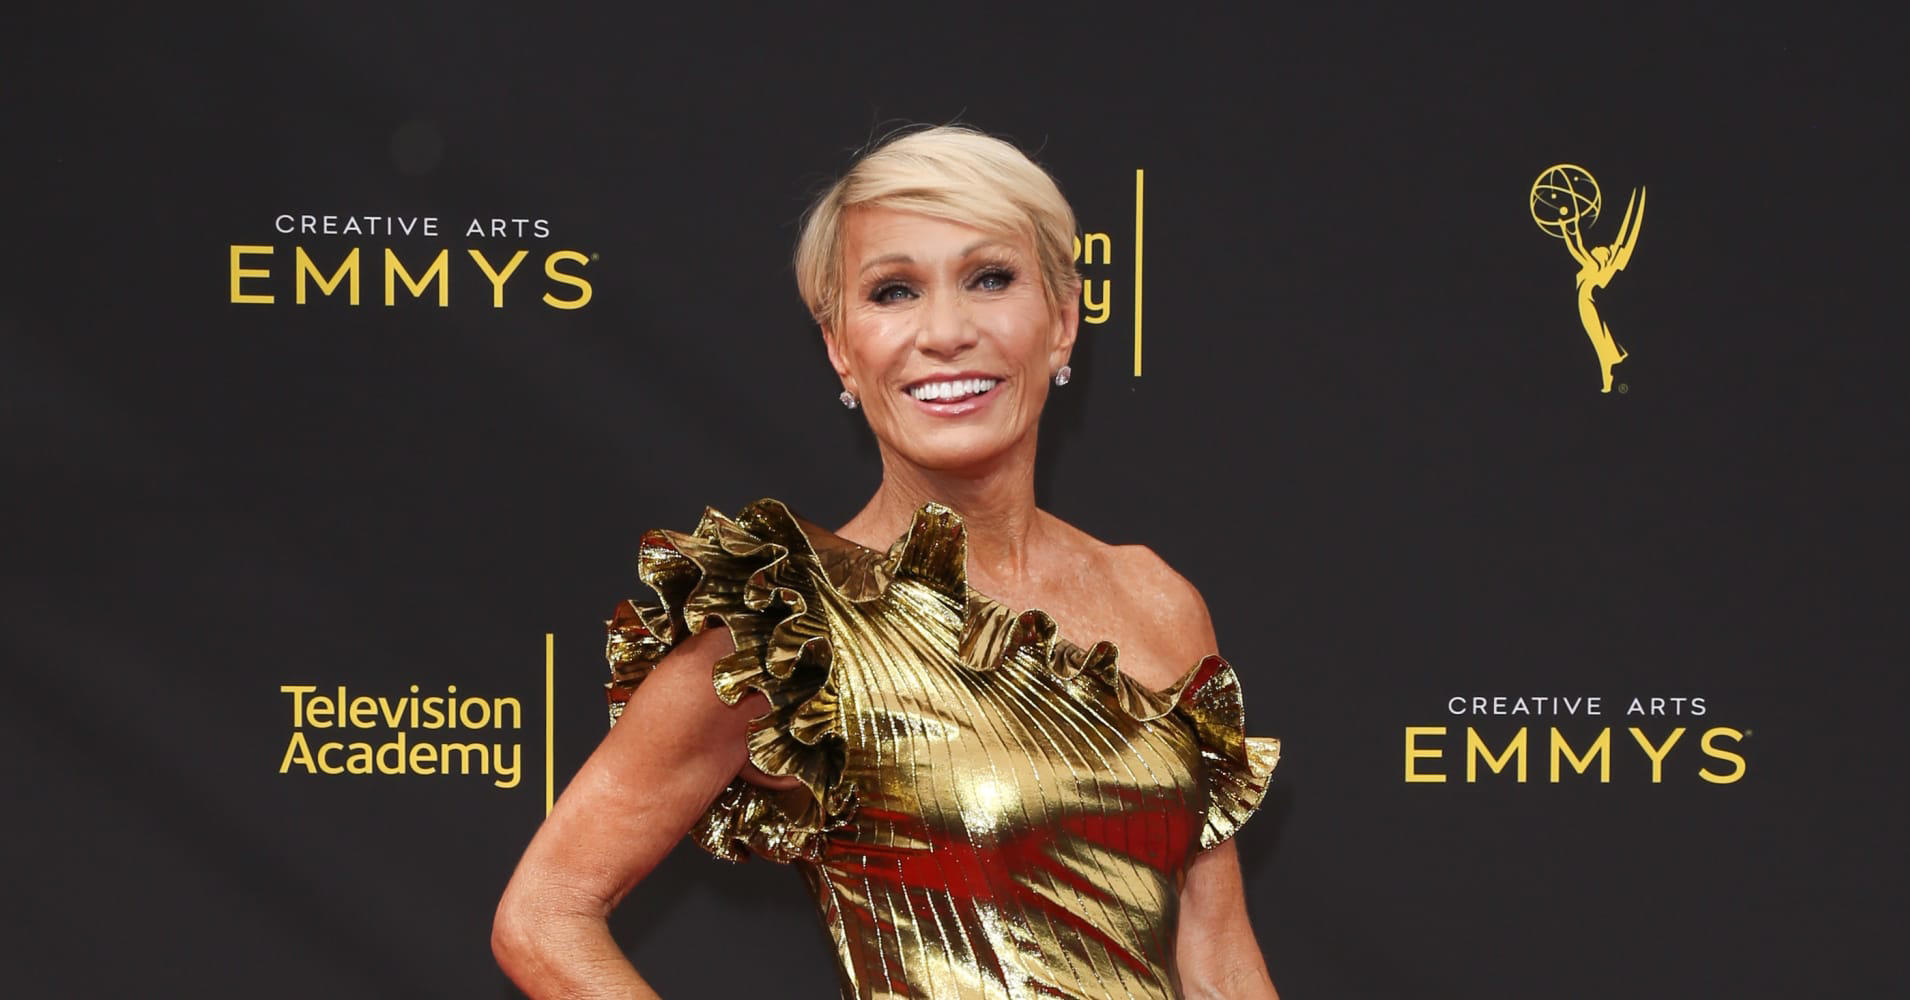 Barbara Corcoran was 'scared' after selling her real estate firm for $66  million in 2001: 'I had no way to produce money